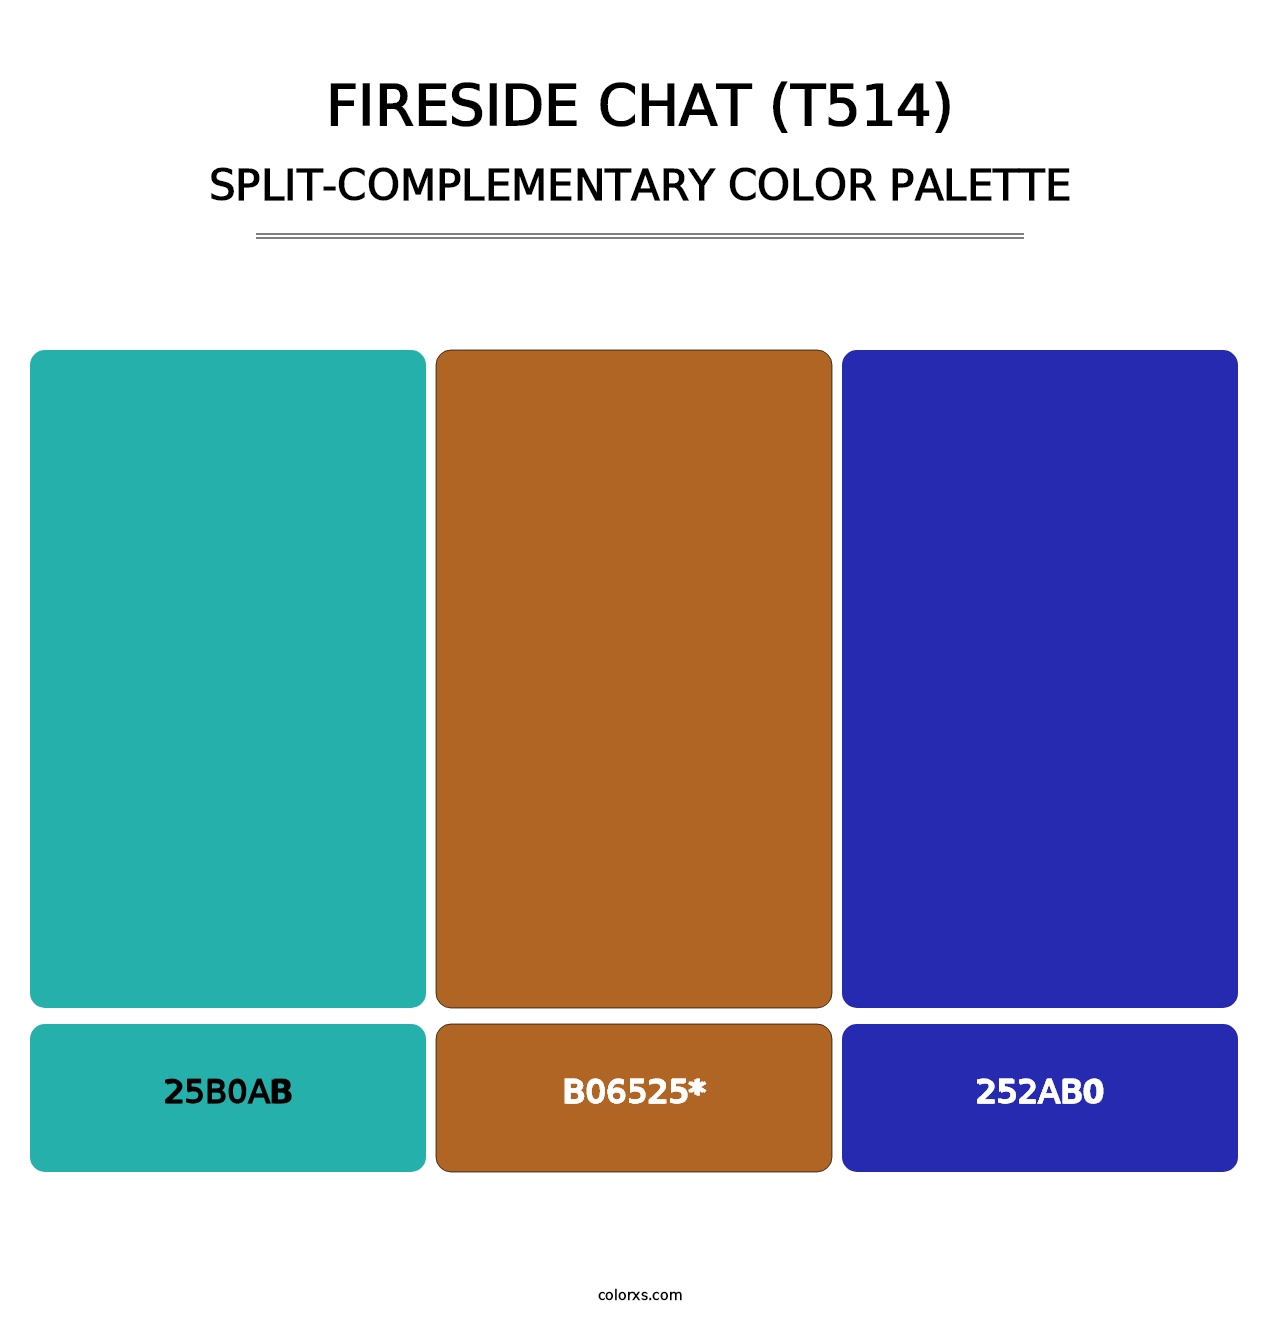 Fireside Chat (T514) - Split-Complementary Color Palette